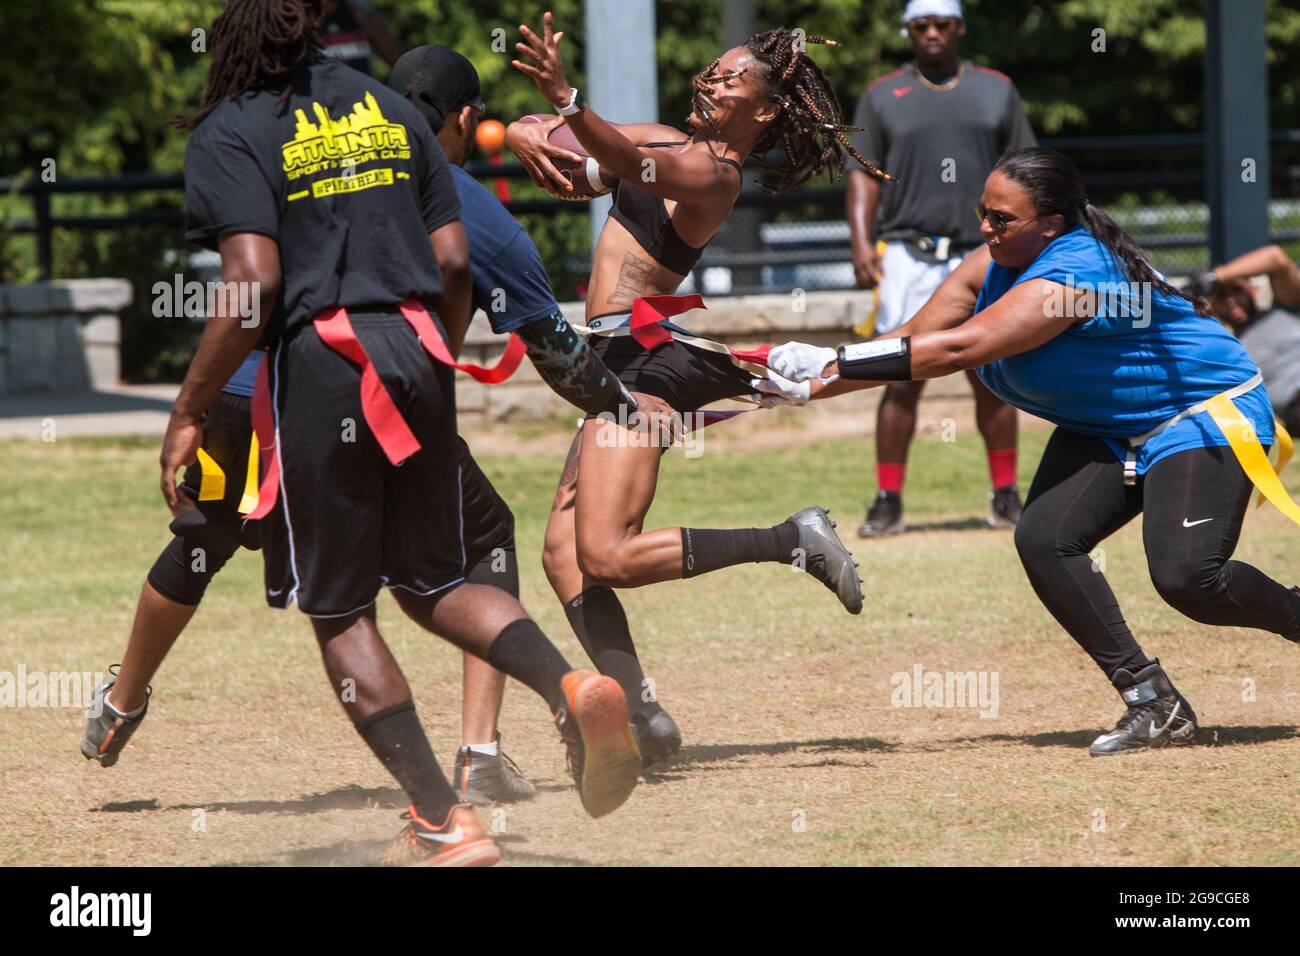 Atlanta, GA, USA - June 1, 2019:  A woman strenuously pulls the flags of a female opponent carrying the ball in a rec league flag football game. Stock Photo